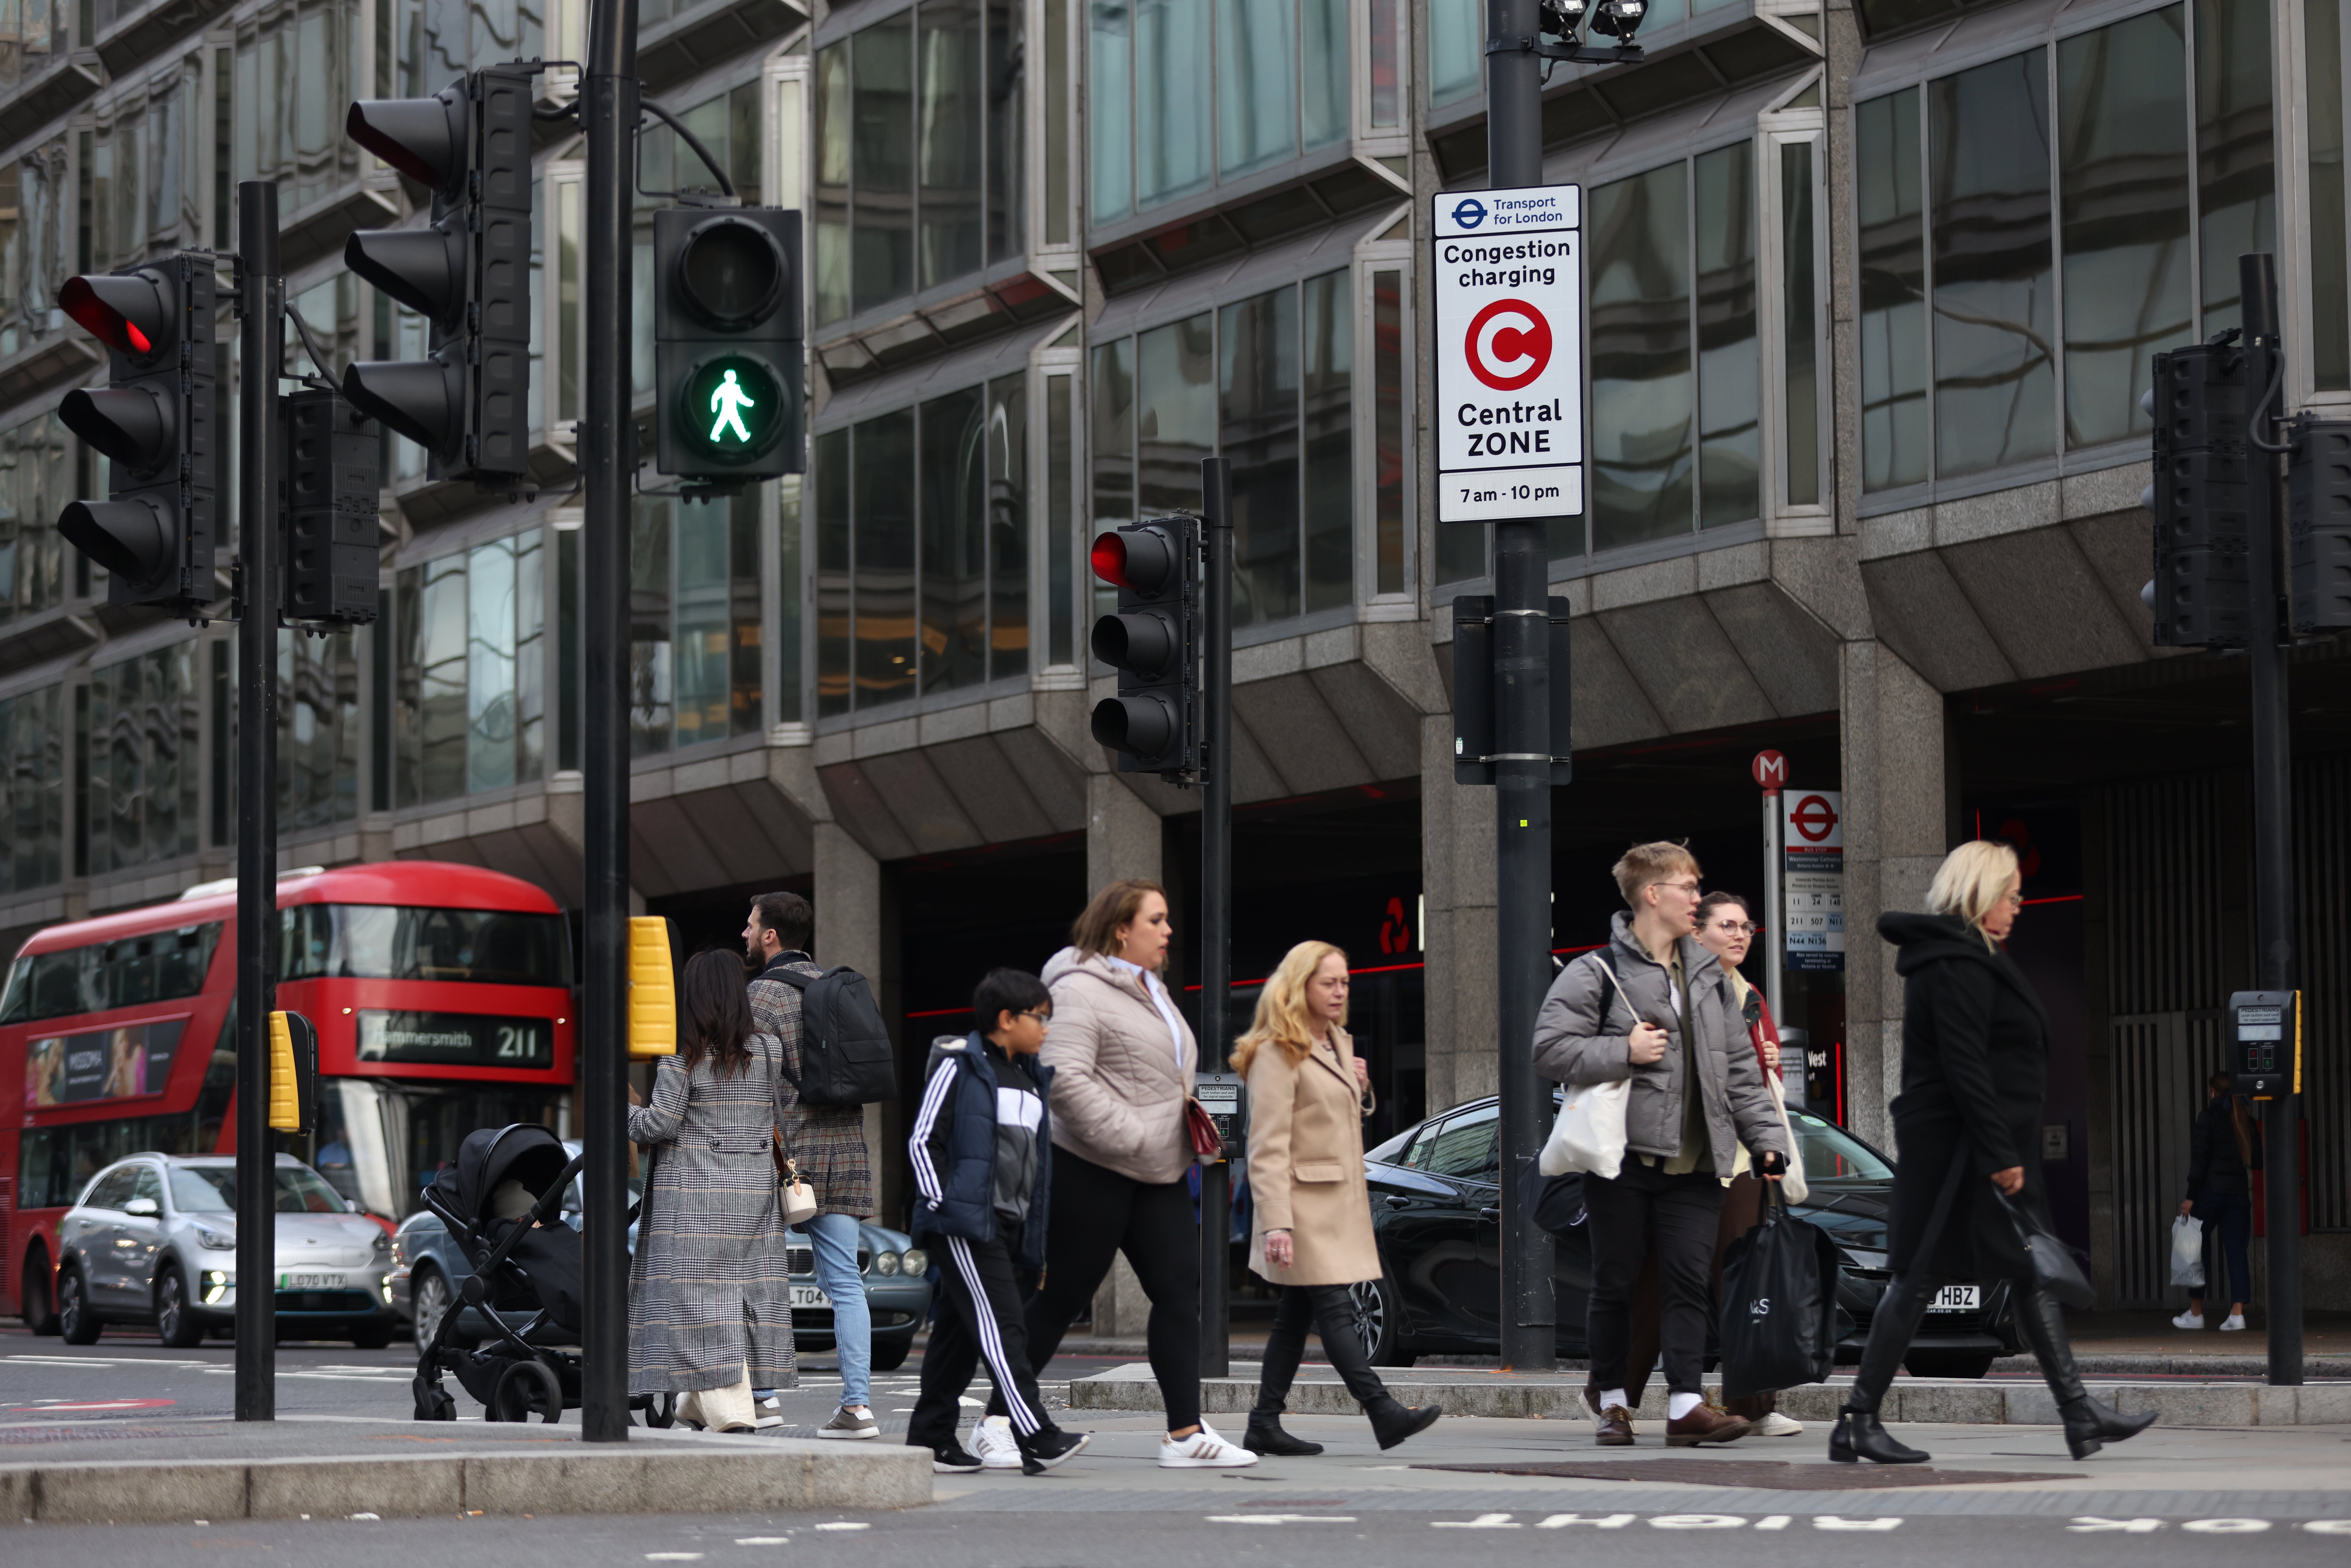 London has expanded its ultra-low-emission zone